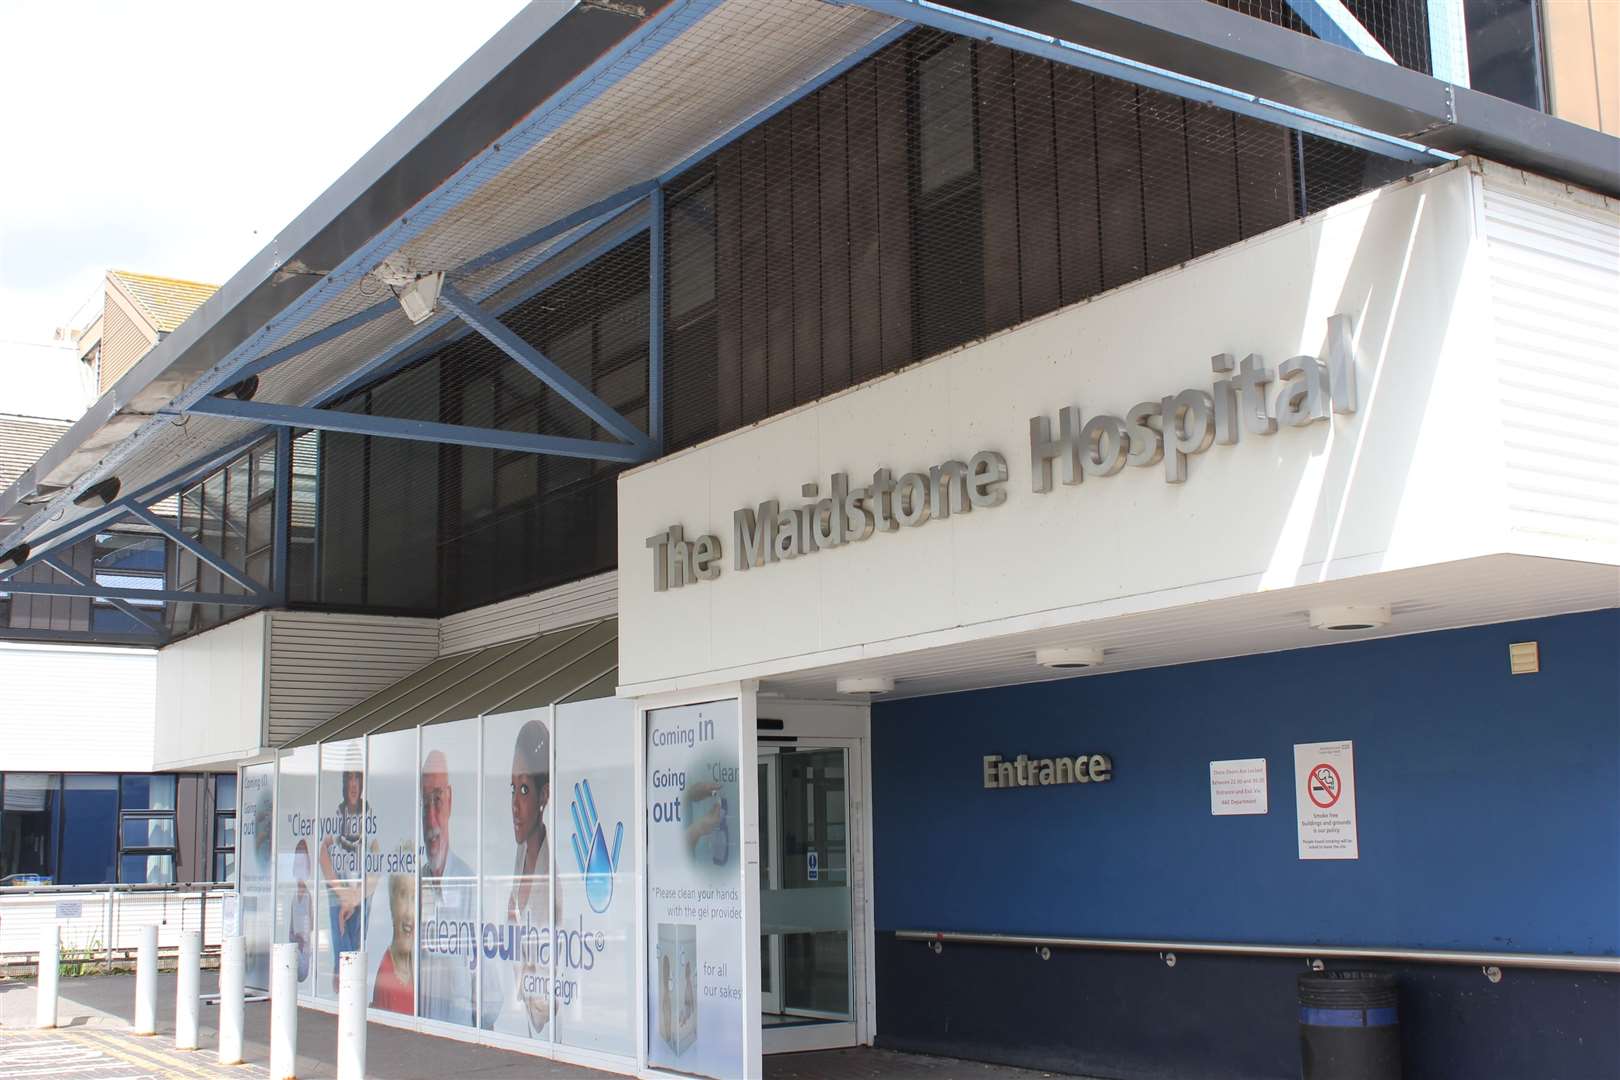 Maidstone Hospital, where a nurse, a receptionist and two staff were threatened by a drunken patient last year